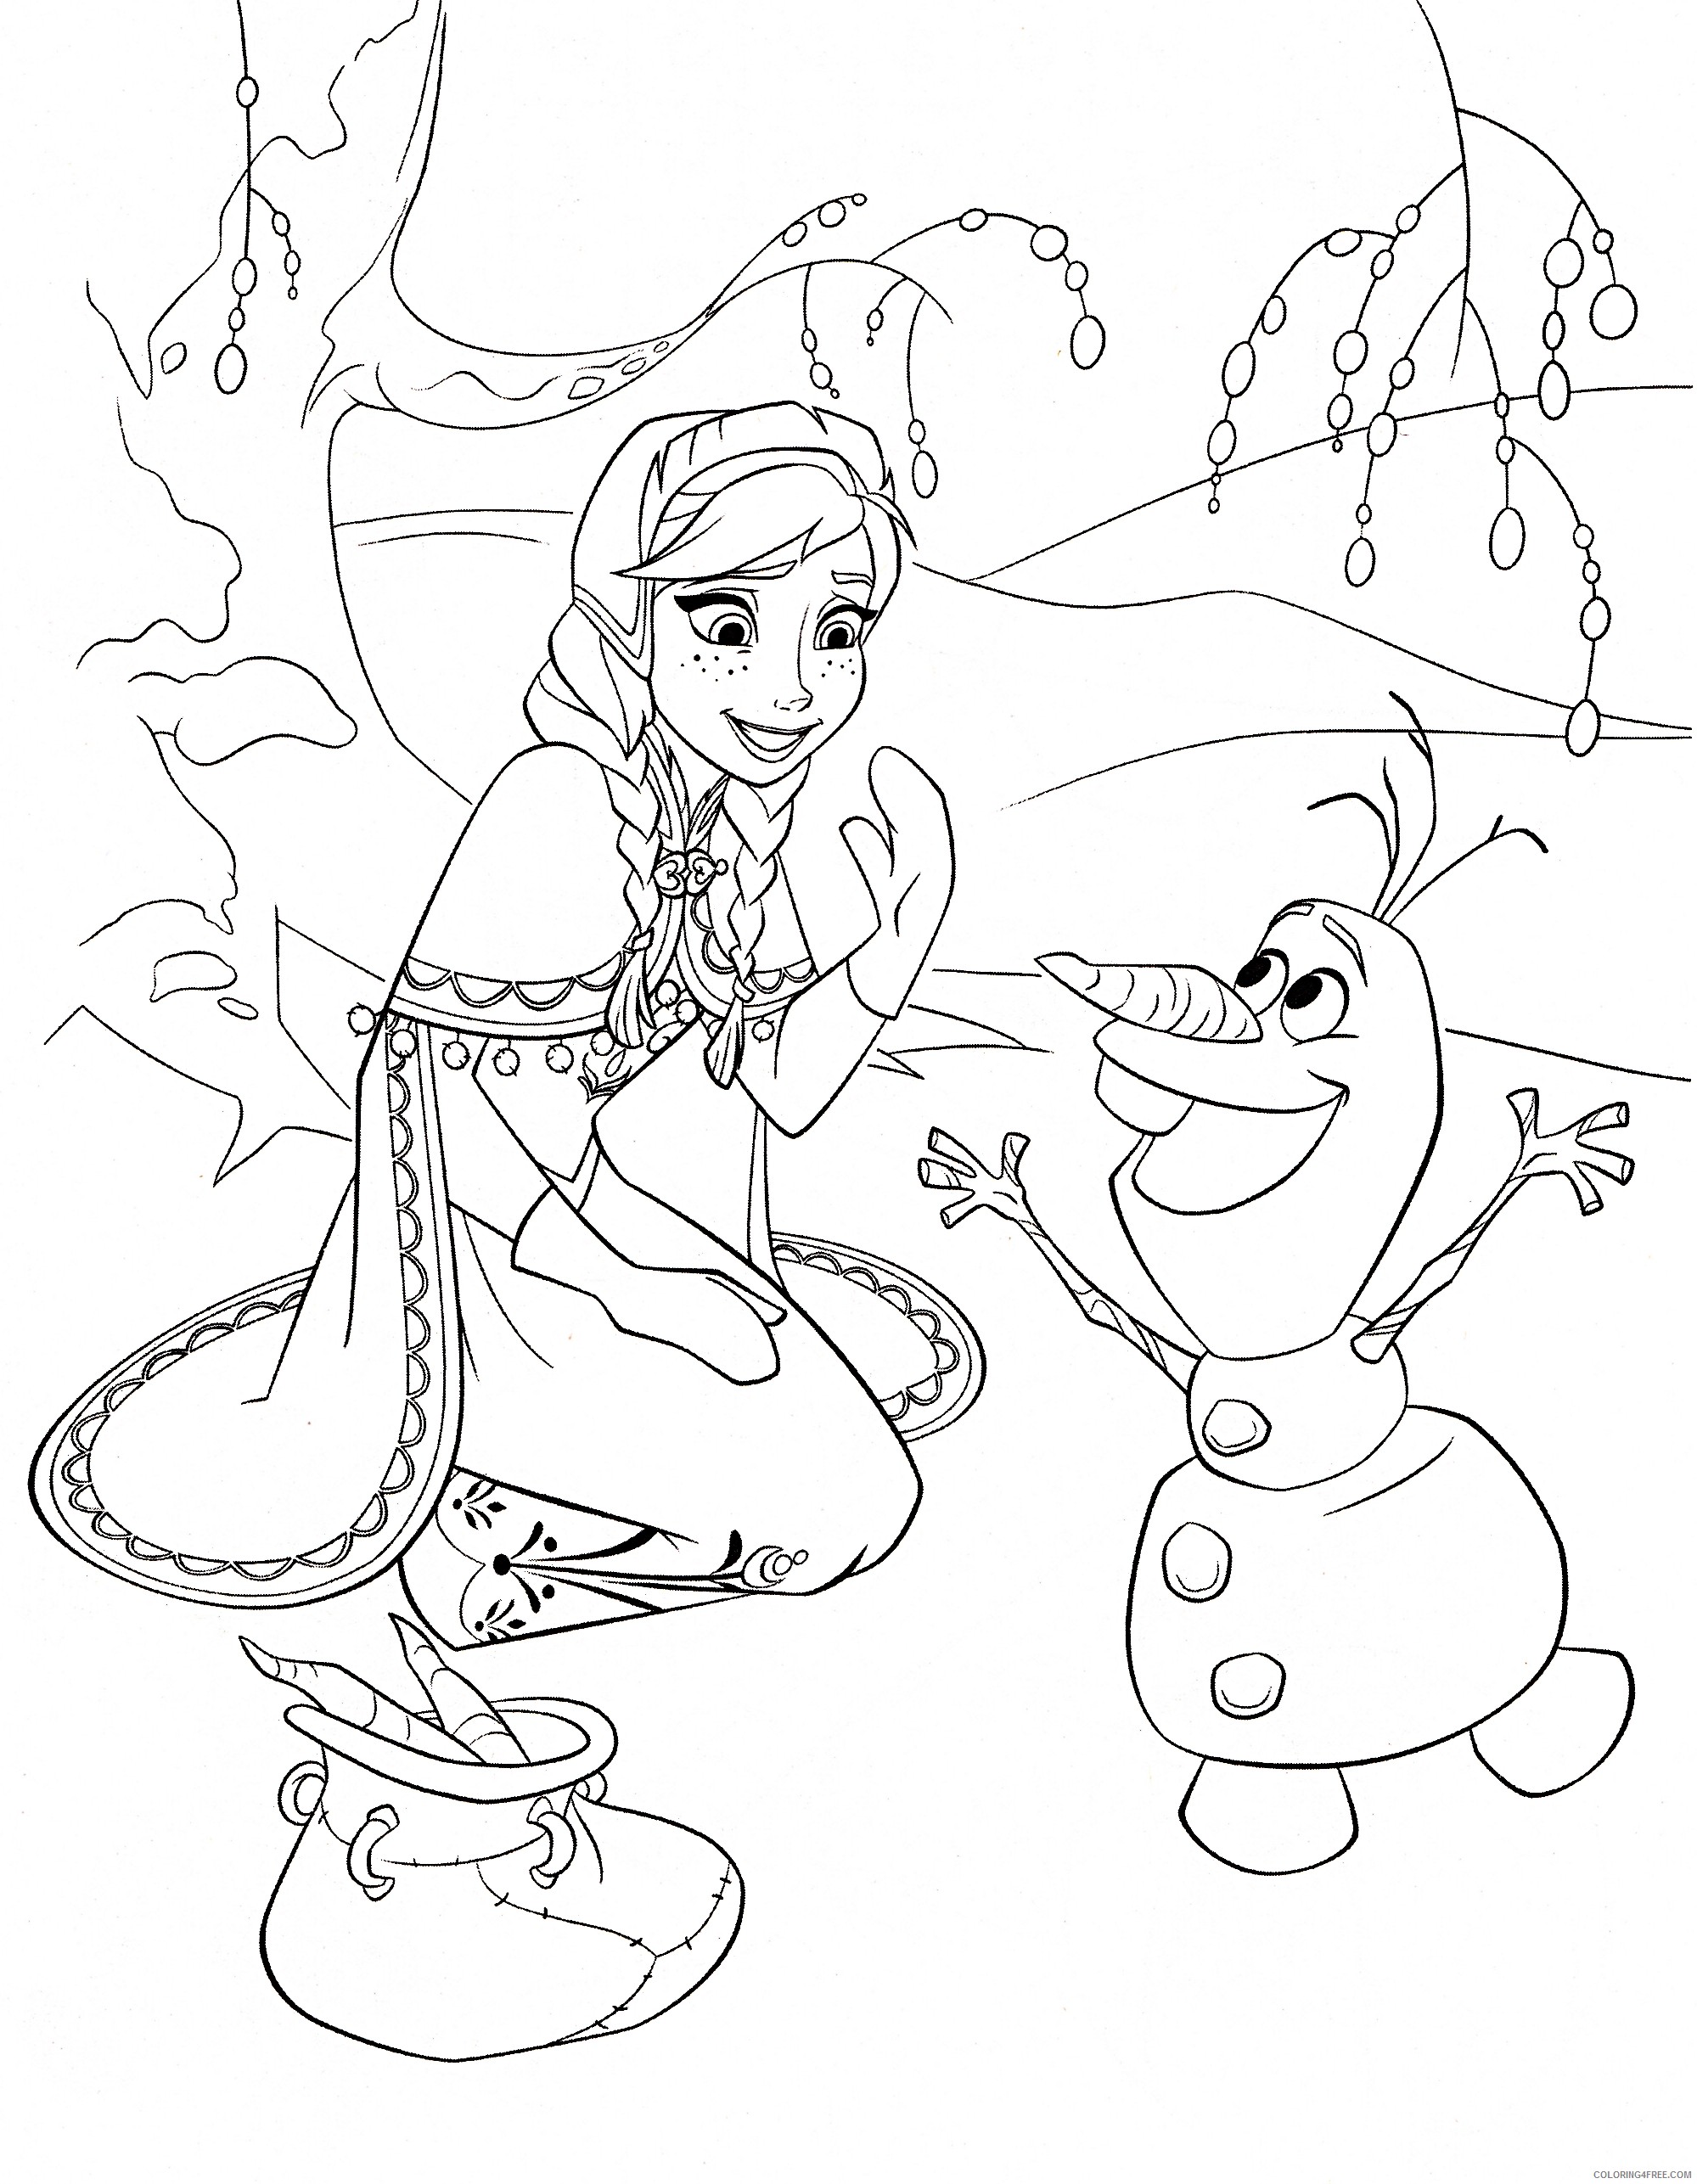 anna and olaf coloring pages Coloring4free